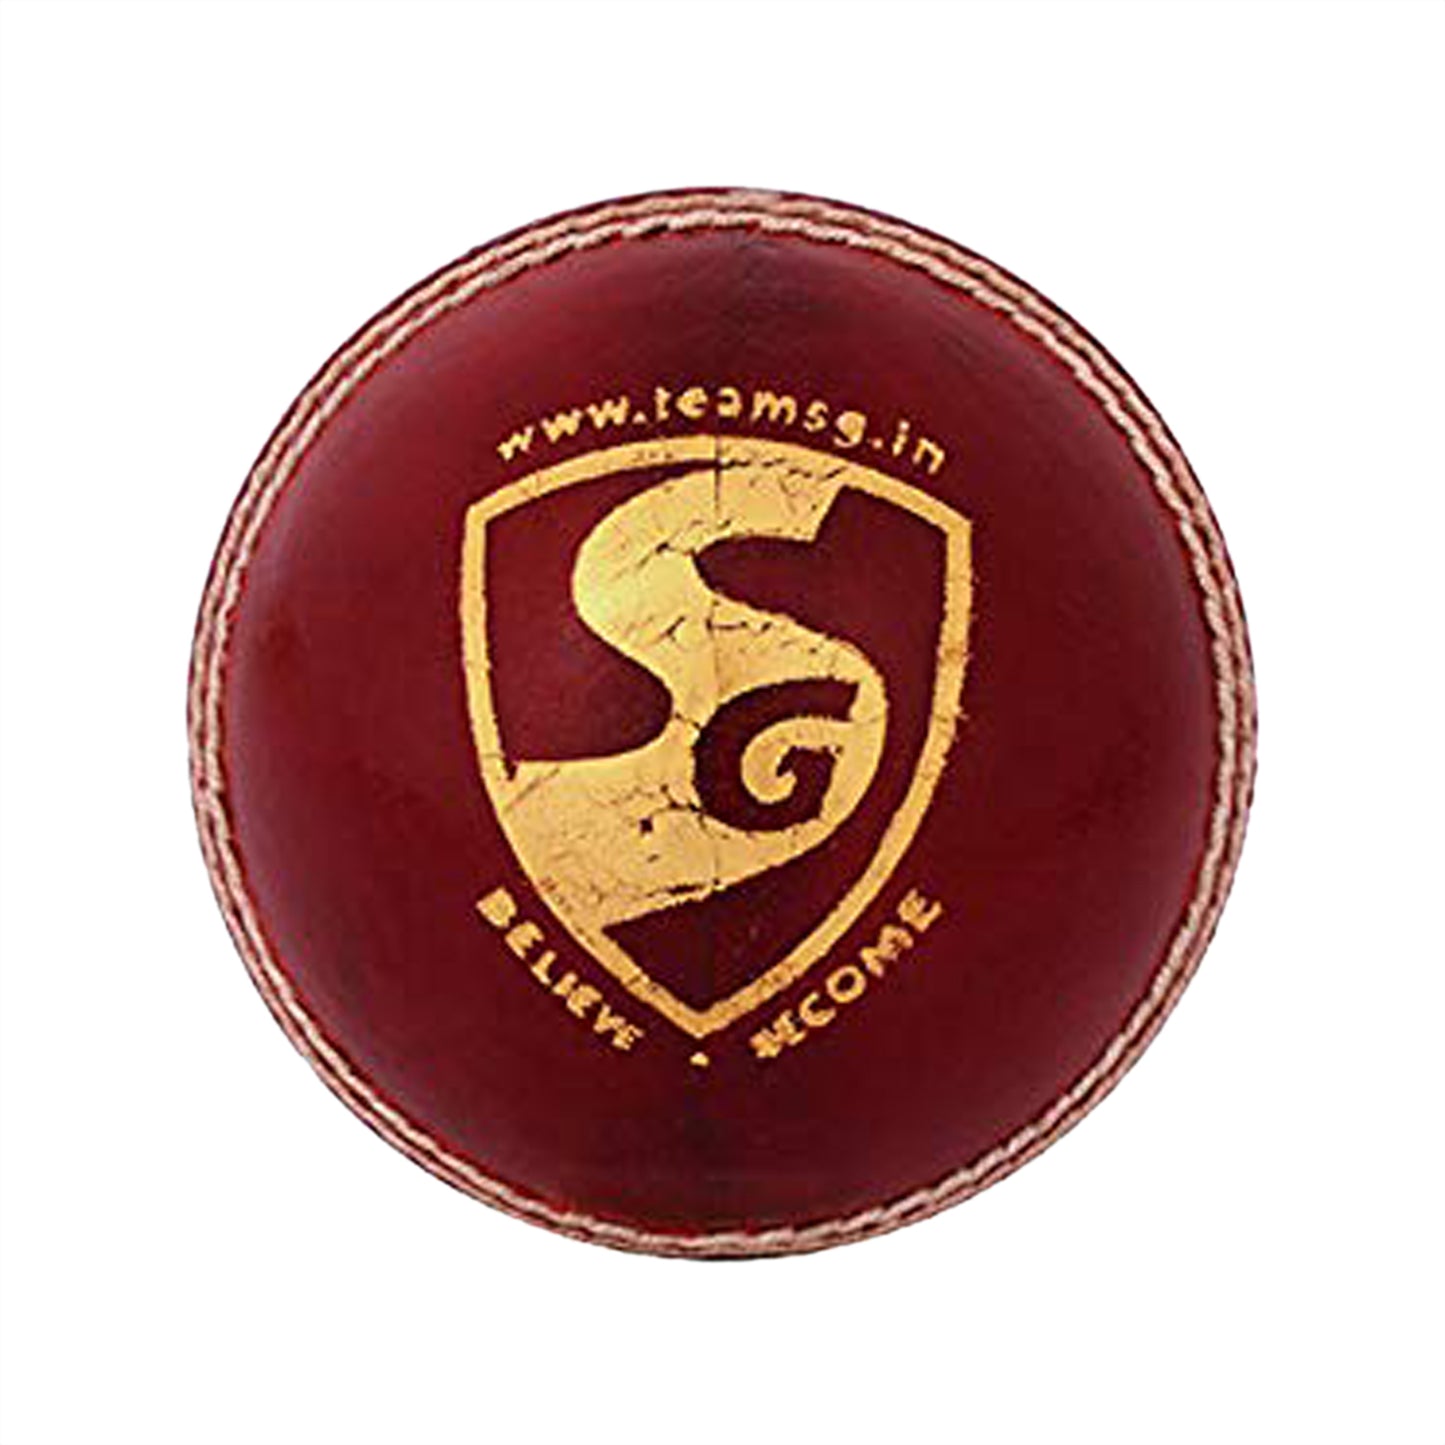 SG League Cricket Ball for Adult , Red - 1PC - Best Price online Prokicksports.com